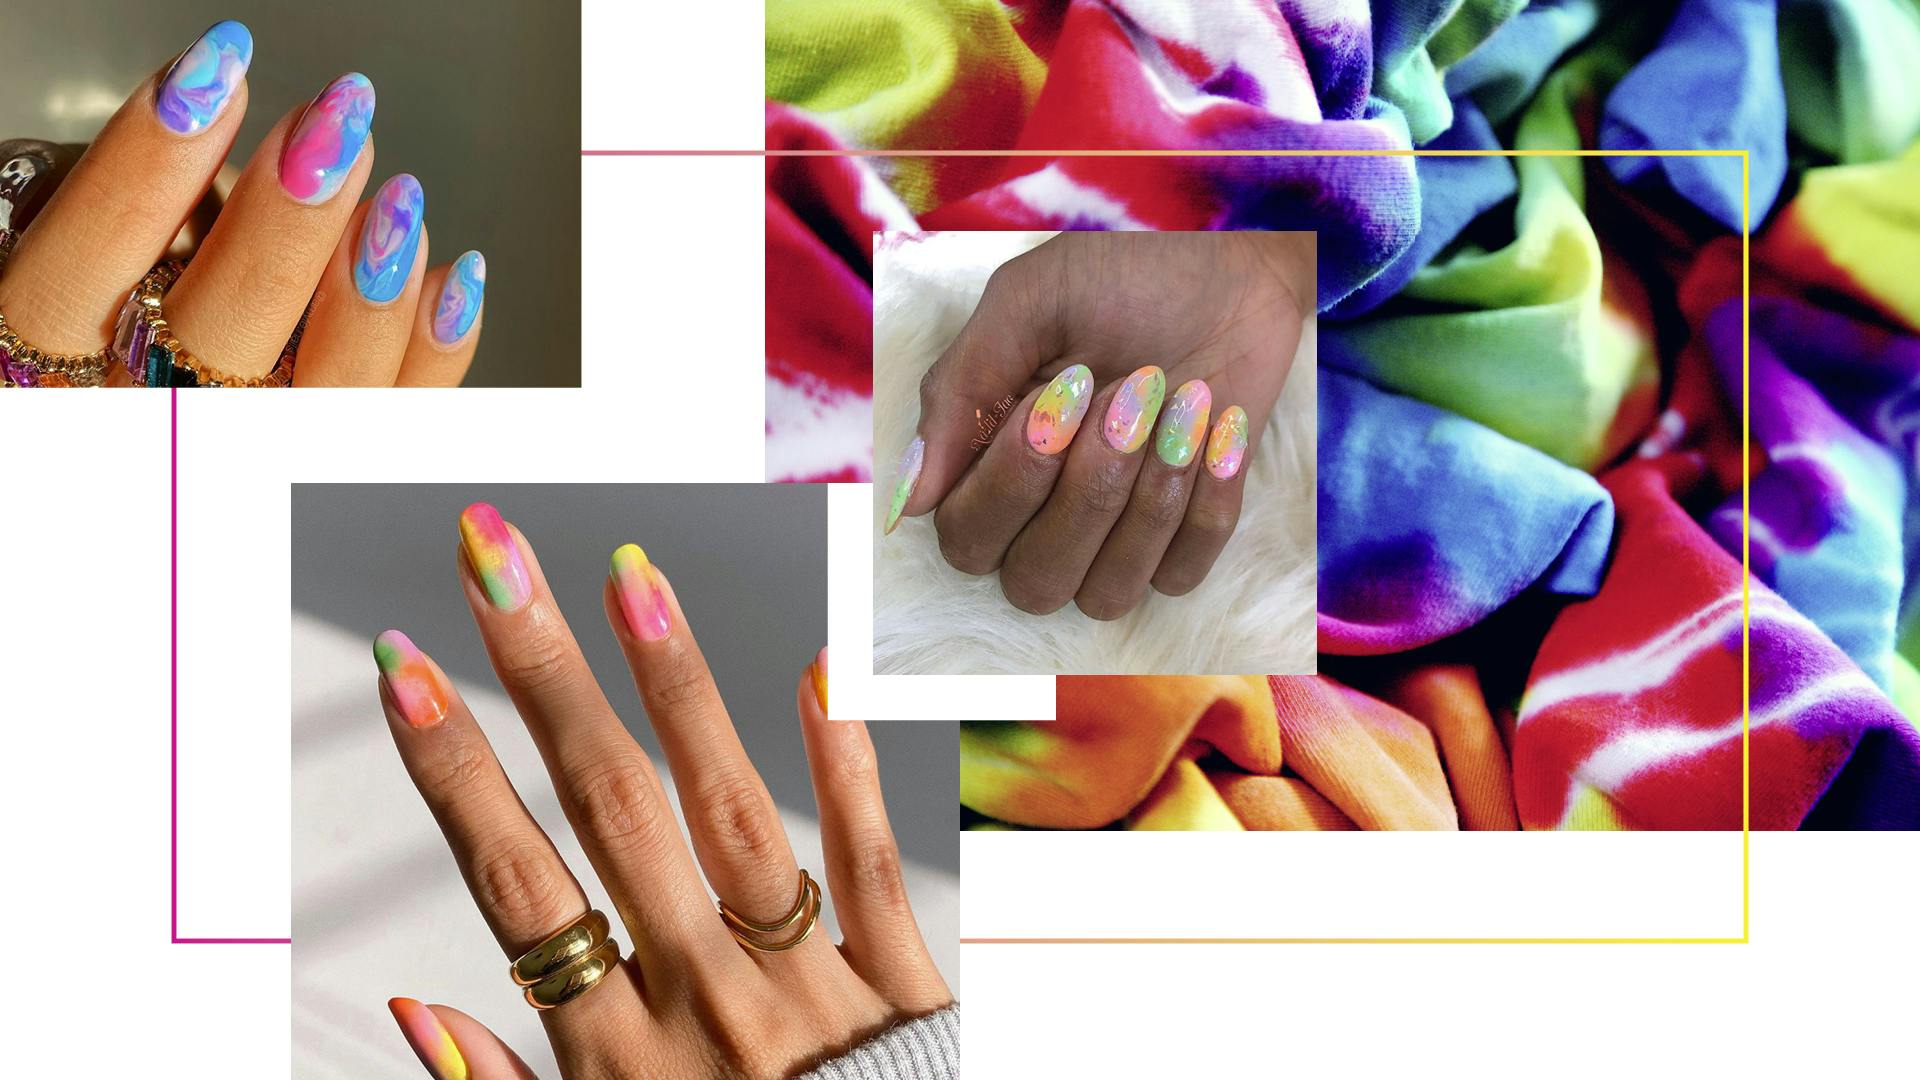 What is the classiest color of nail polish? - Quora